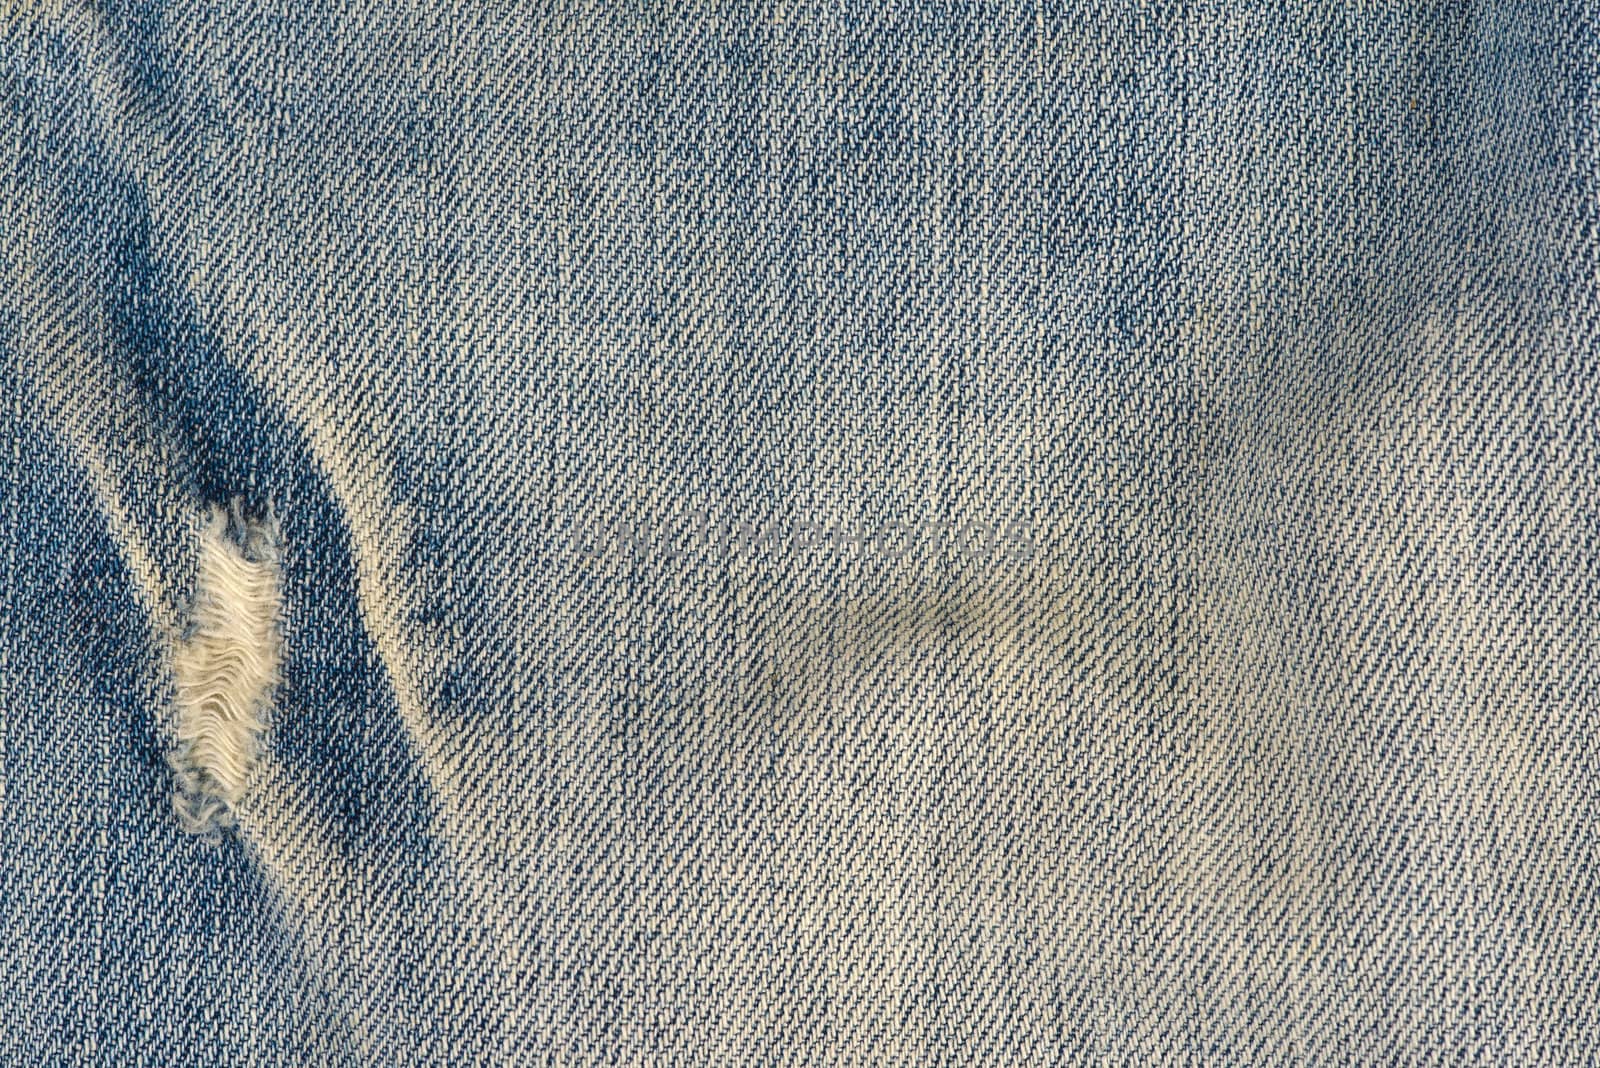 Old blue jeans pattern background by angelsimon